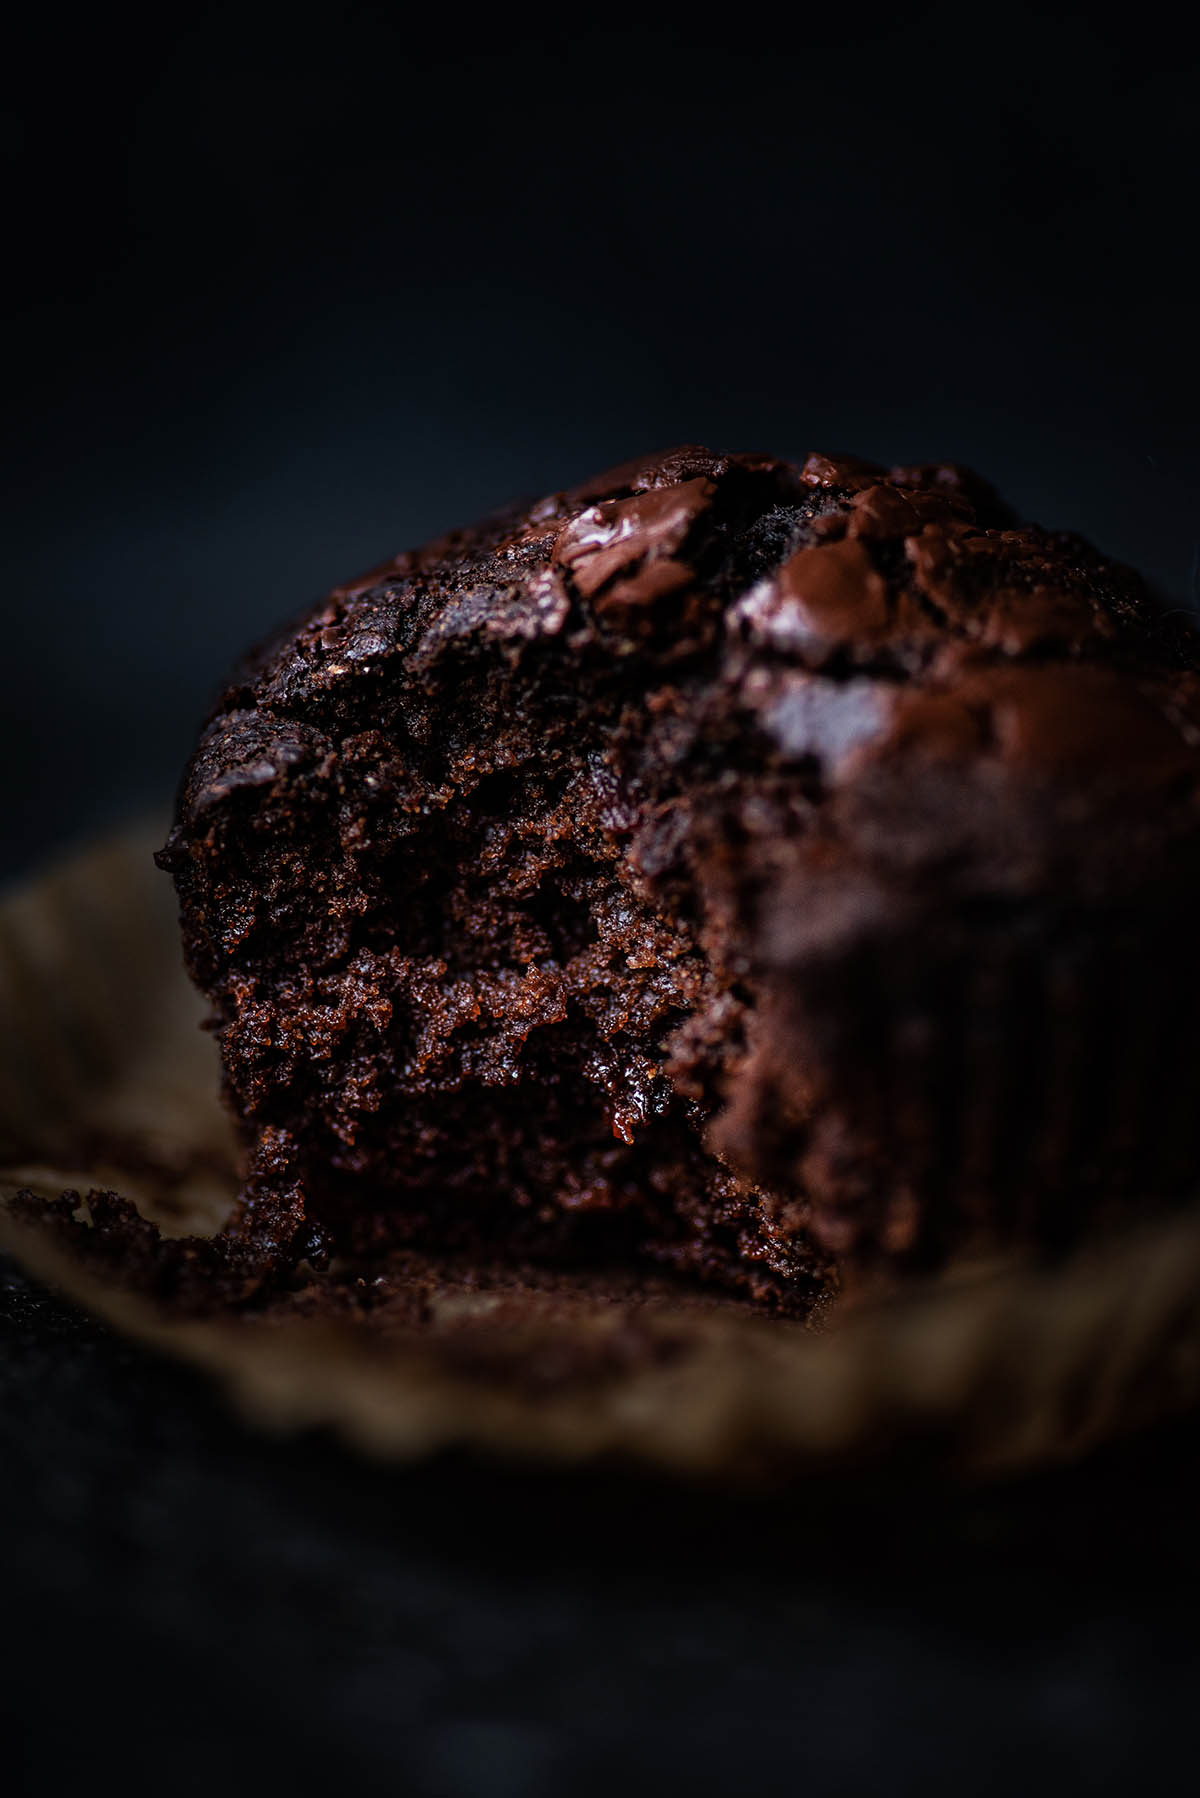 A chocolate muffin with a bite taken out on the muffin liner.